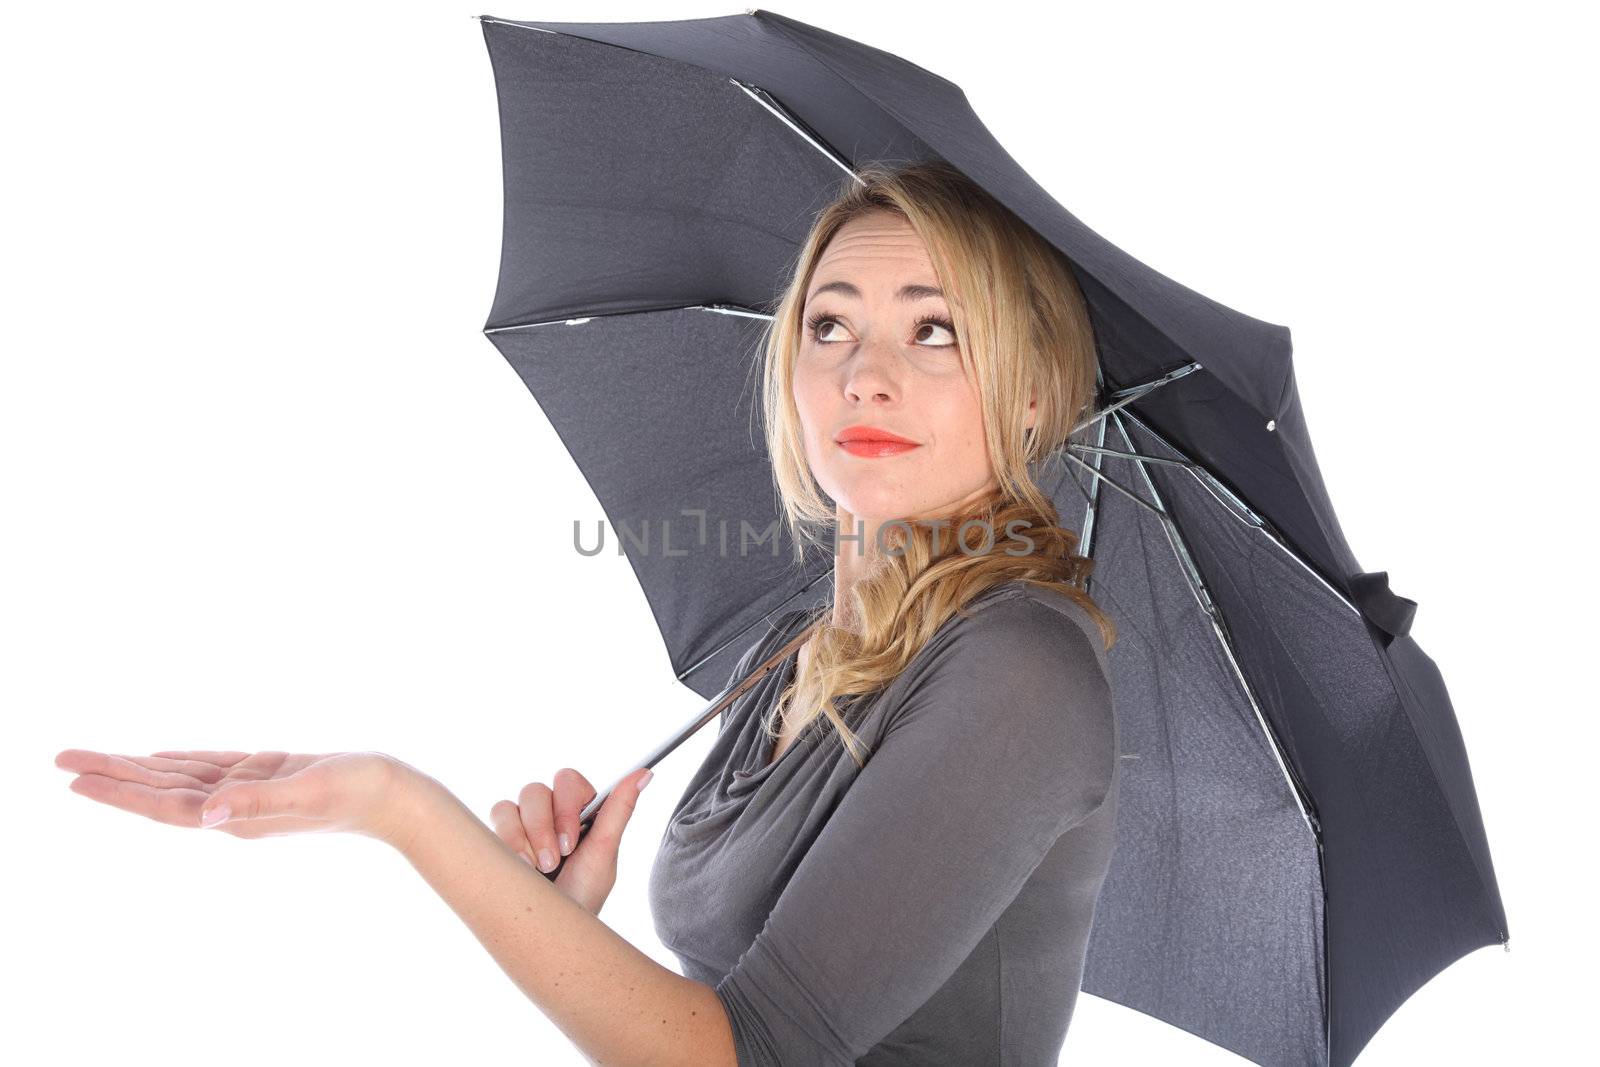 Woman Holding Umbrella Looking Up by Farina6000